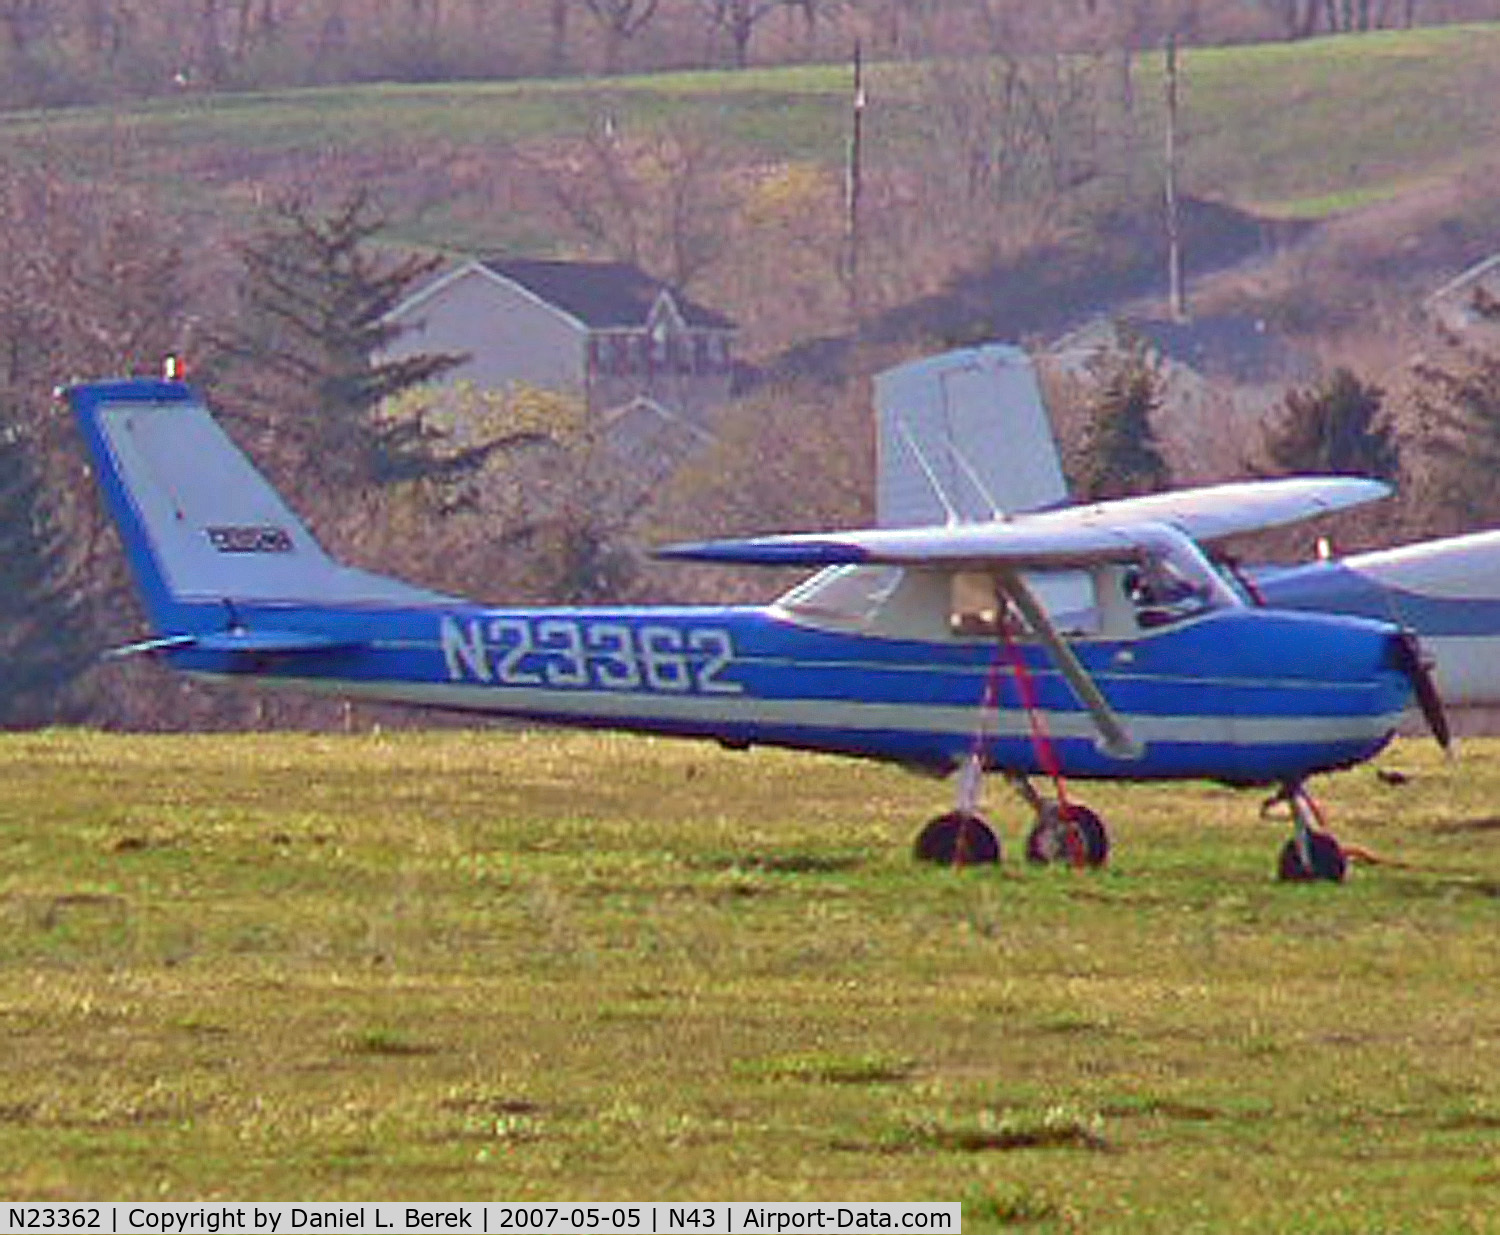 N23362, 1968 Cessna 150H C/N 15068903, Bright blue Cessna shimmers in the evening summer haze.